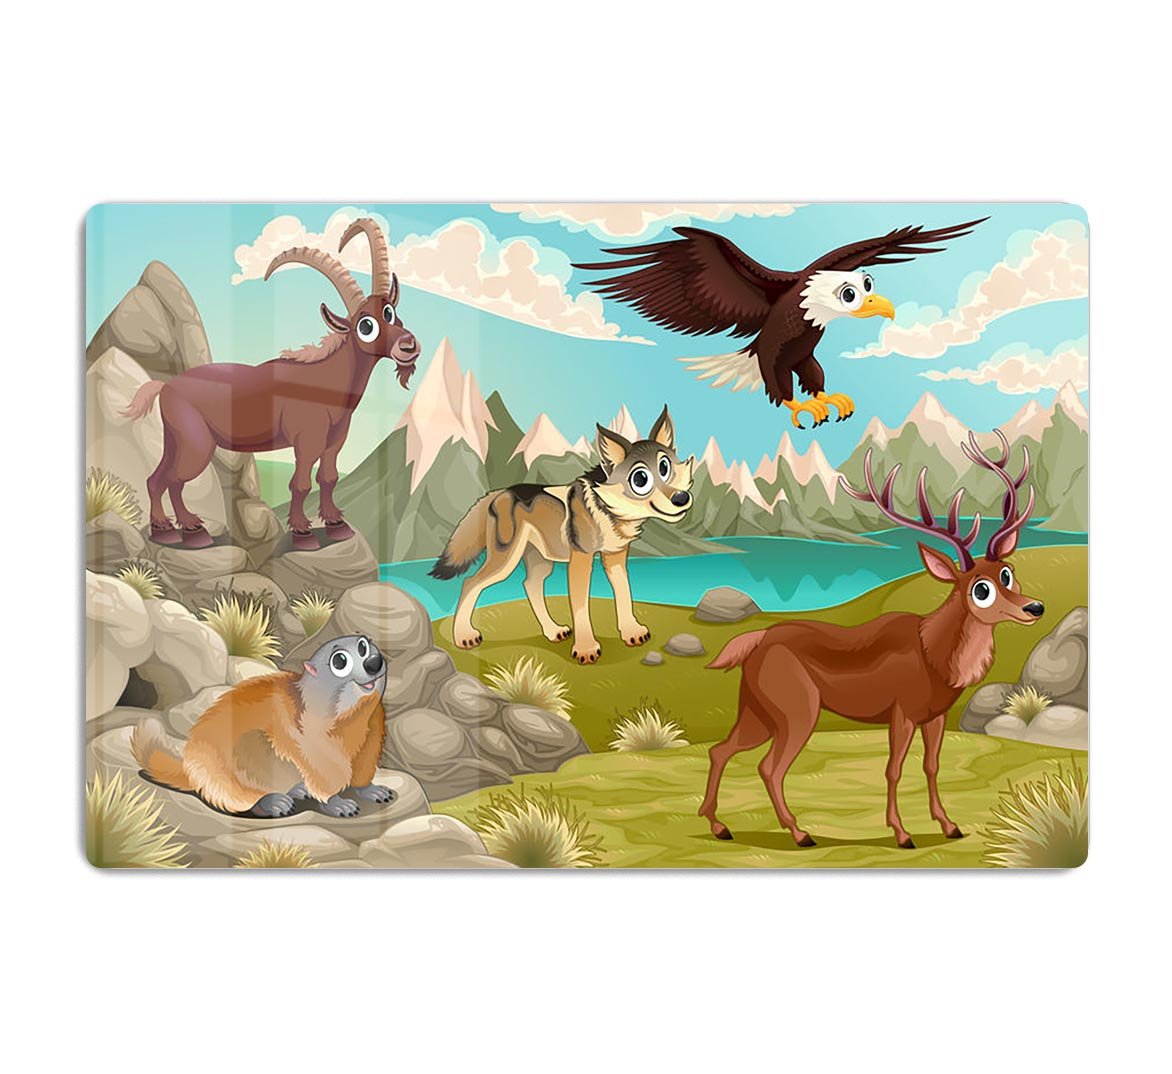 Funny animals in a mountain landscape HD Metal Print - Canvas Art Rocks - 1